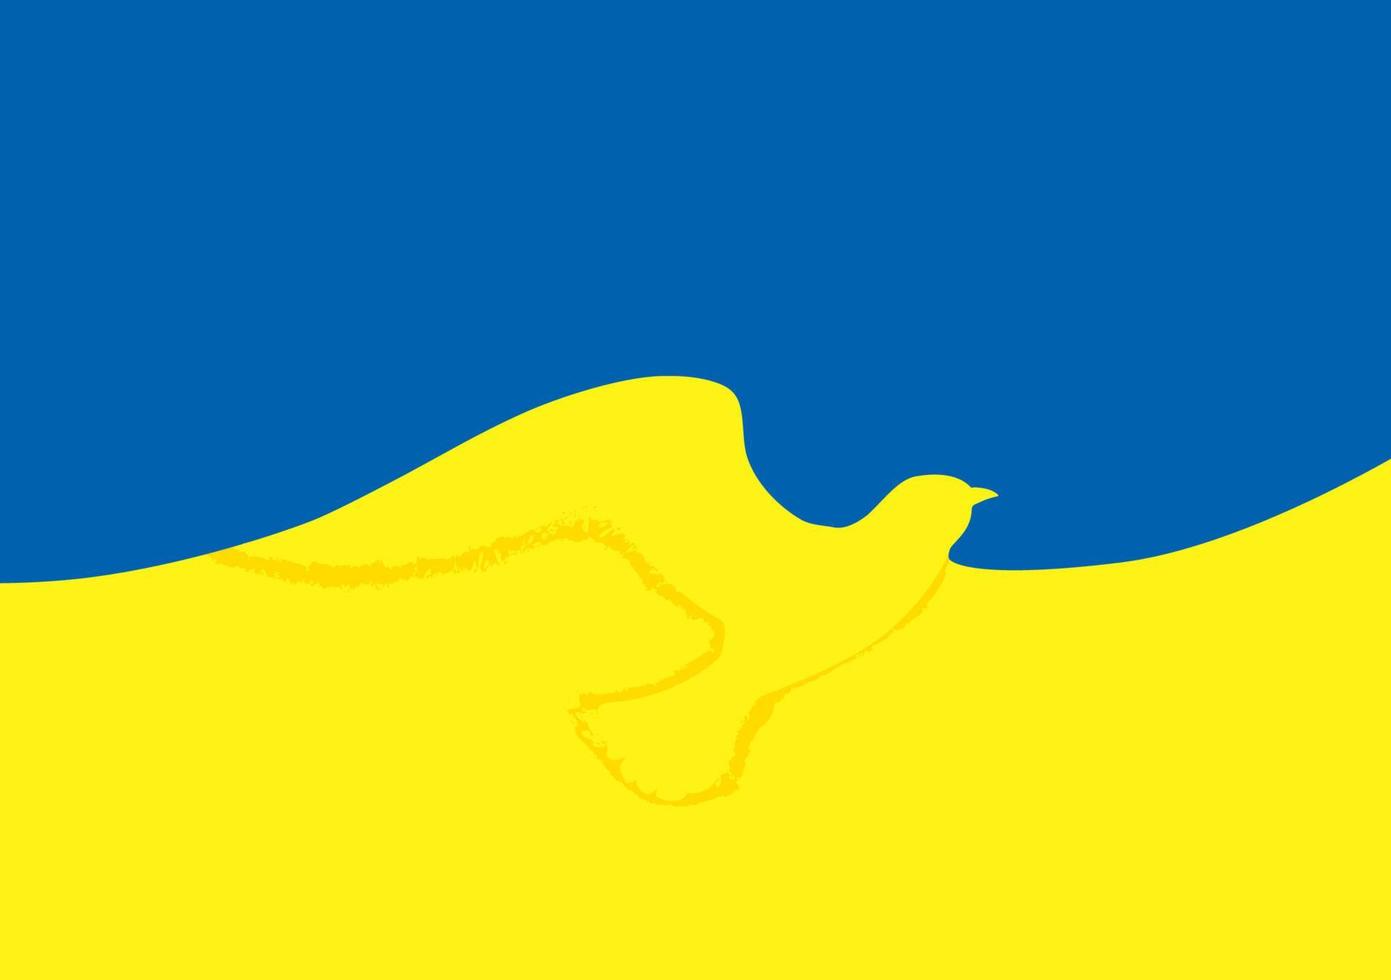 Ukrainian flag with peace dove symbol. Stay with peace icon. Flag of Ukraine with shape of a dove of peace. The concept of no war, peace in Ukraine. vector